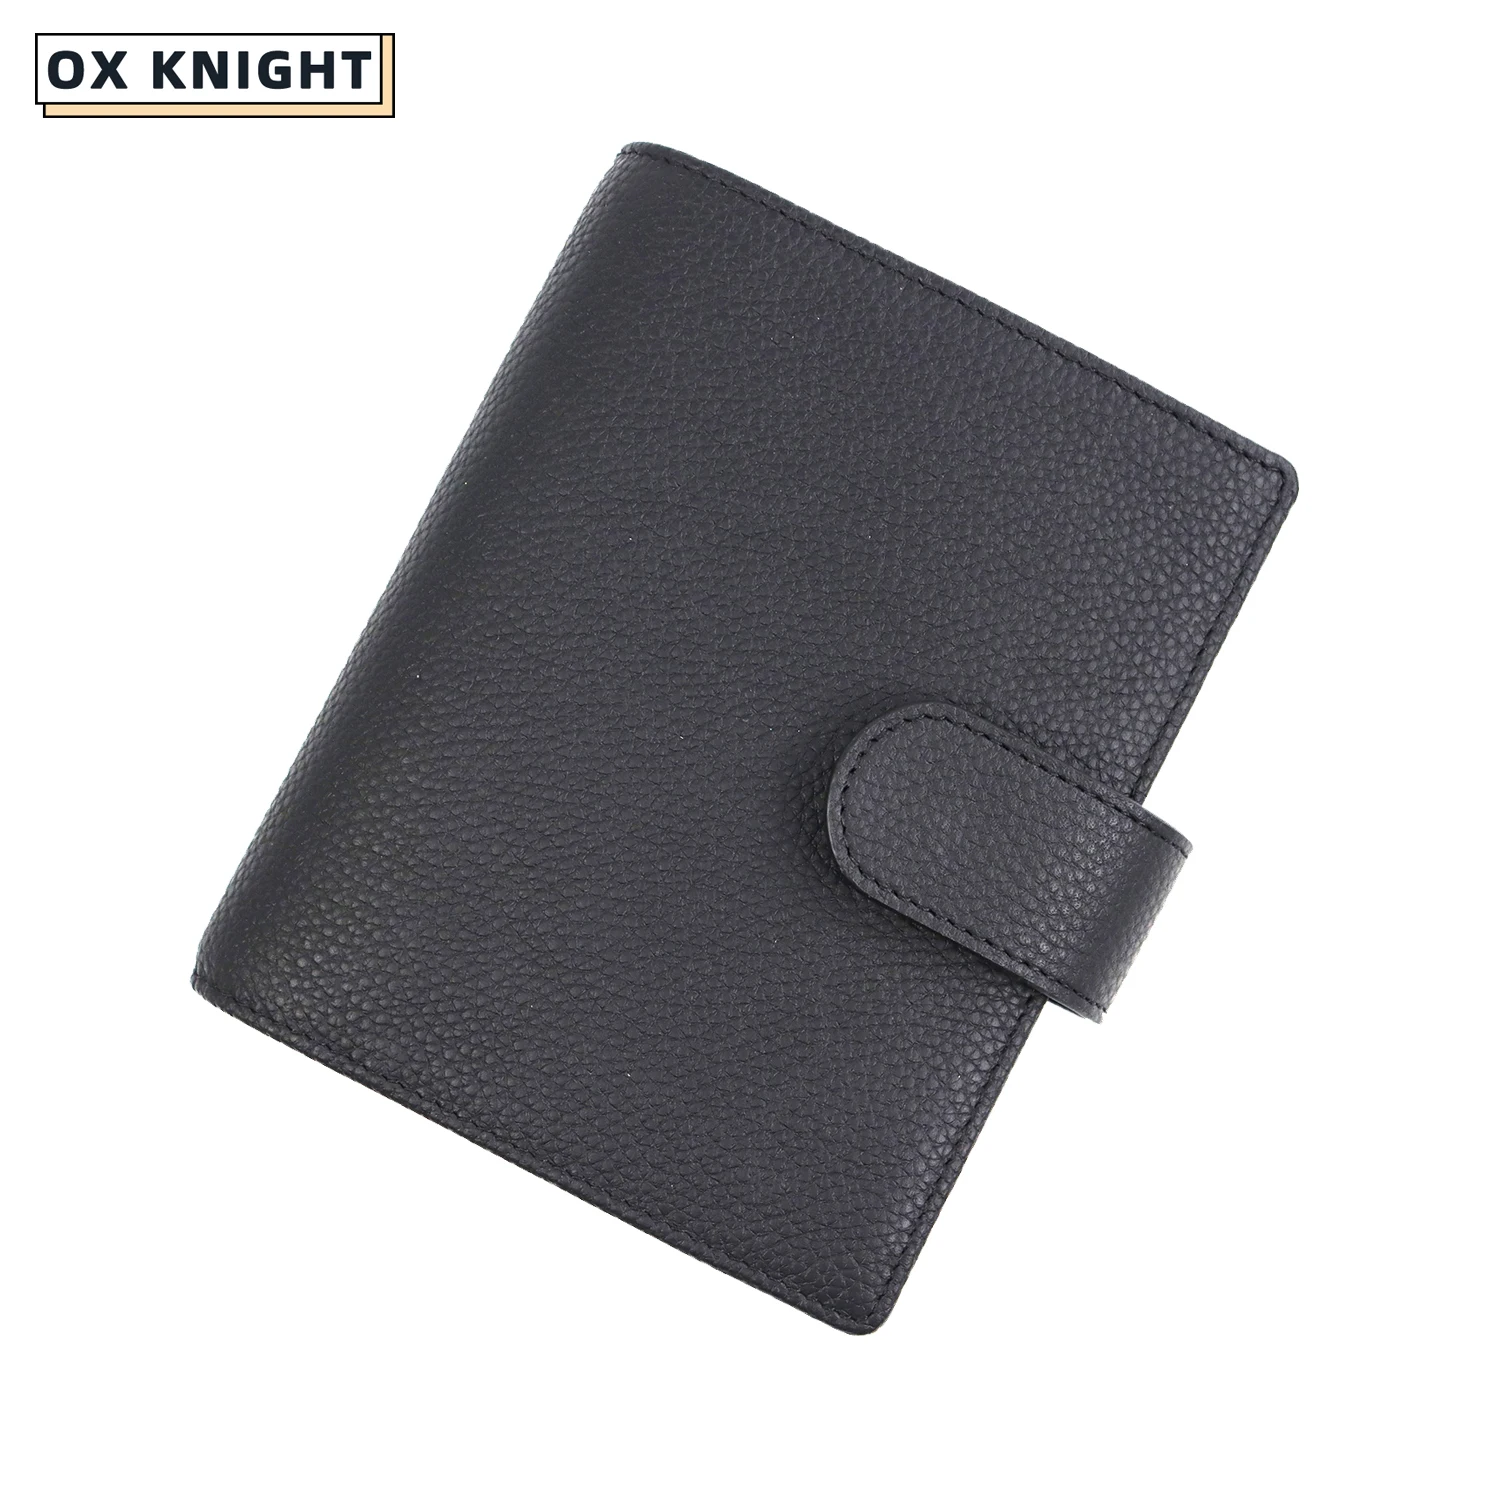 OX KNIGHT 2022 Agenda Leather A7 Notebook With 19 MM Rings Binder Genuine Pebbled Grain Leather Notebook Diary Organizer